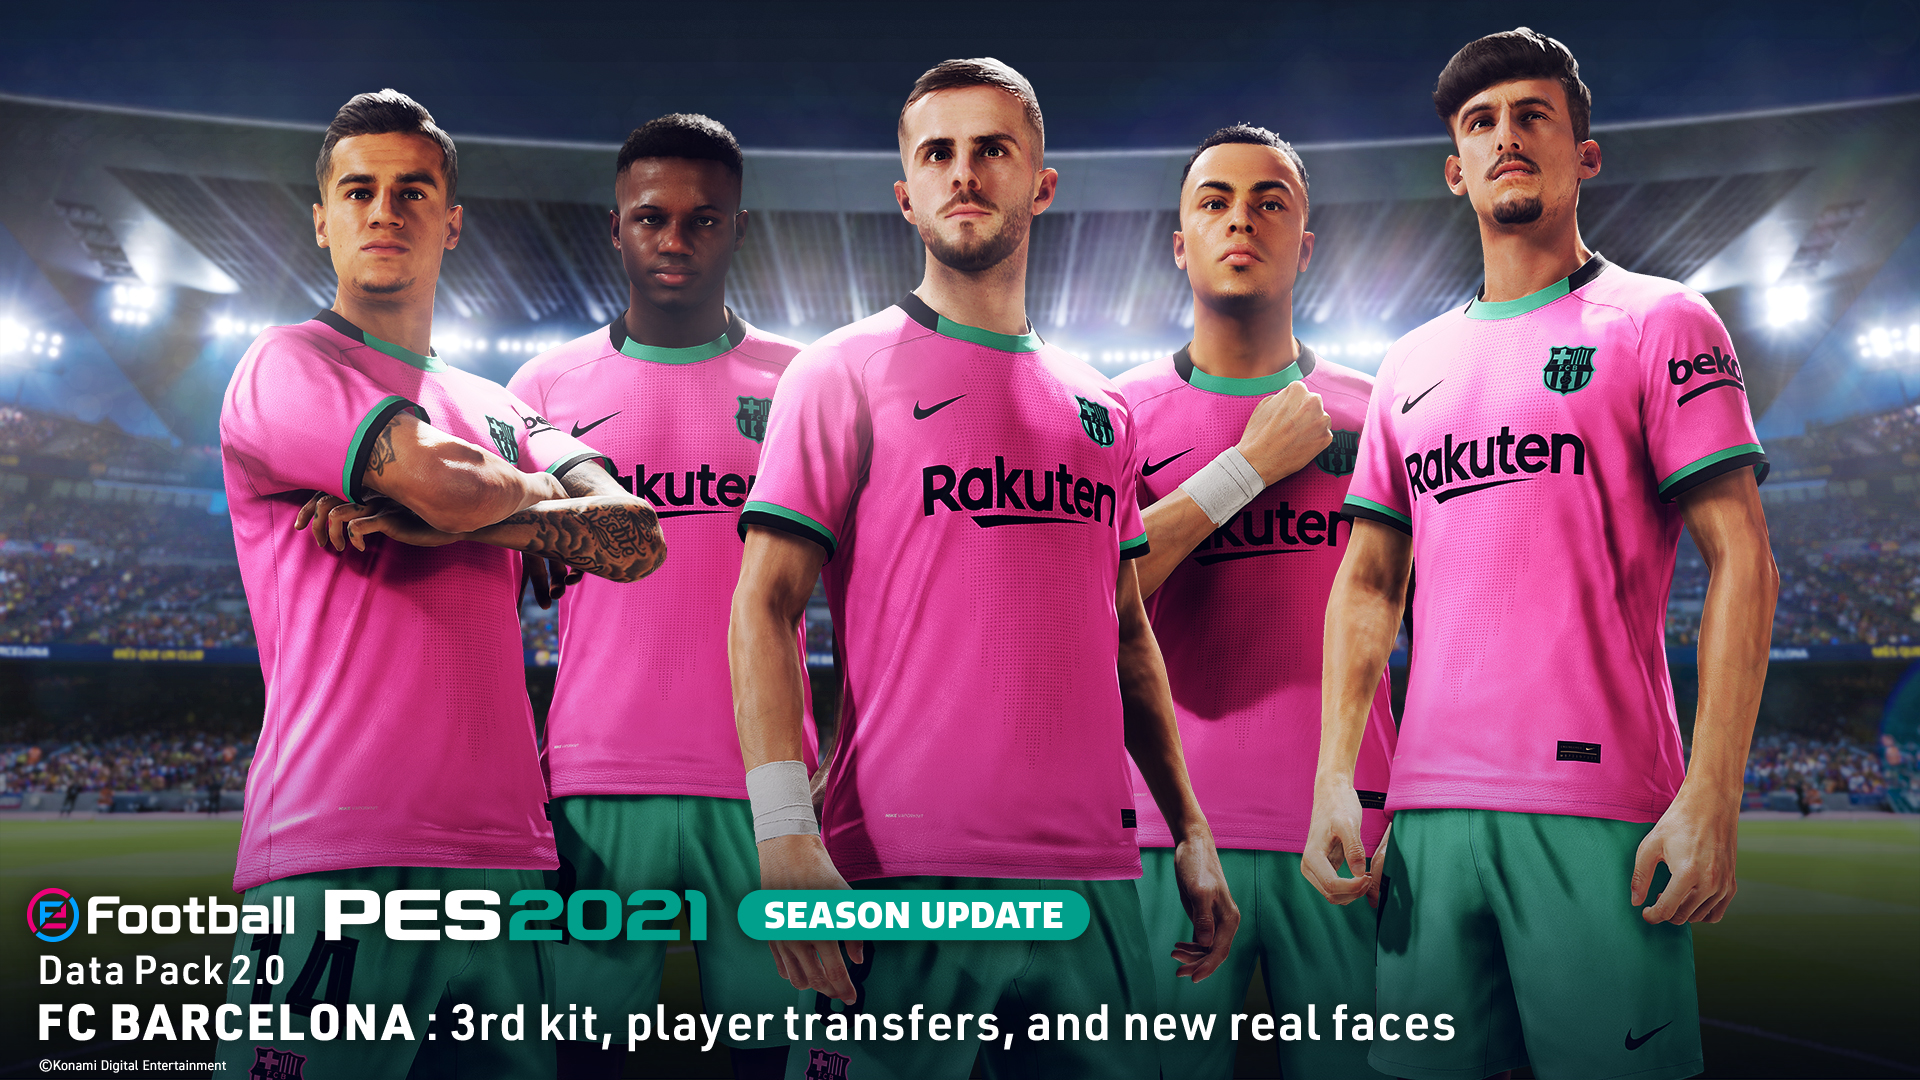 modder Schipbreuk metalen New players and the Barça third kit are now available in PES 2021